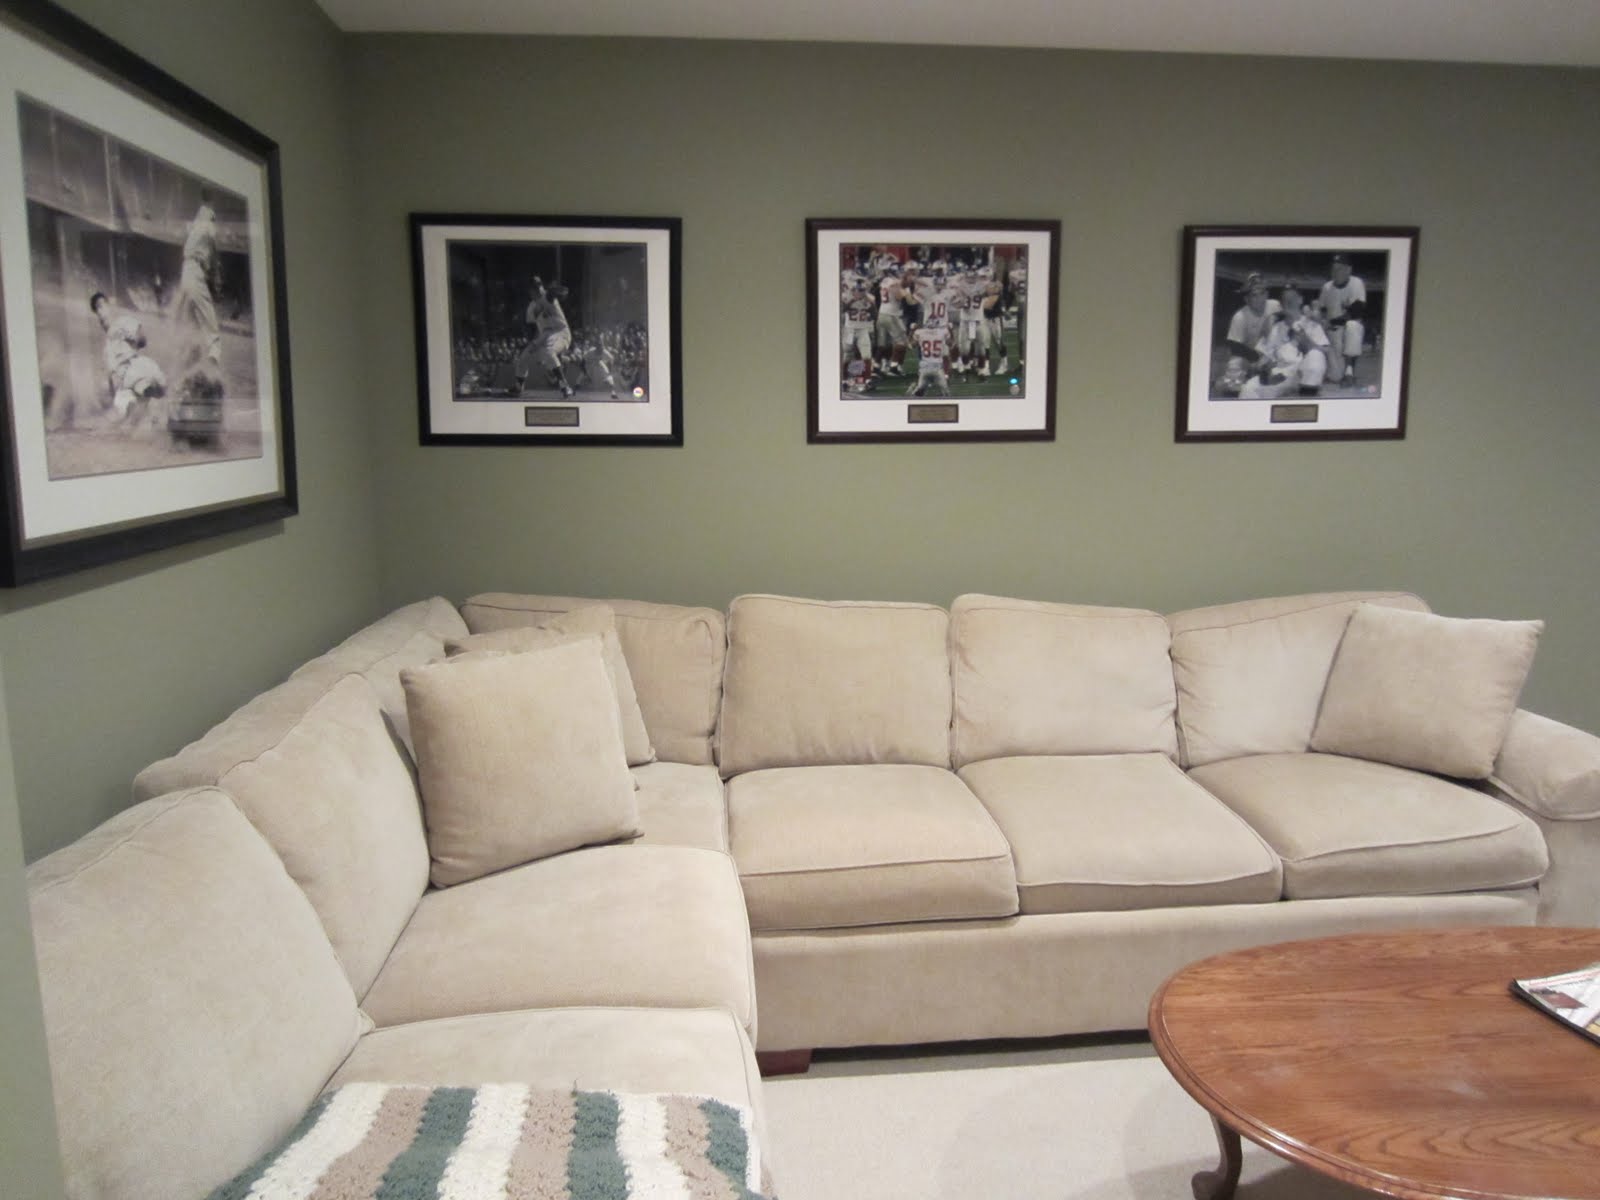 Man Cave Seating Area - Walls are Benjamin Moore Dry Sage